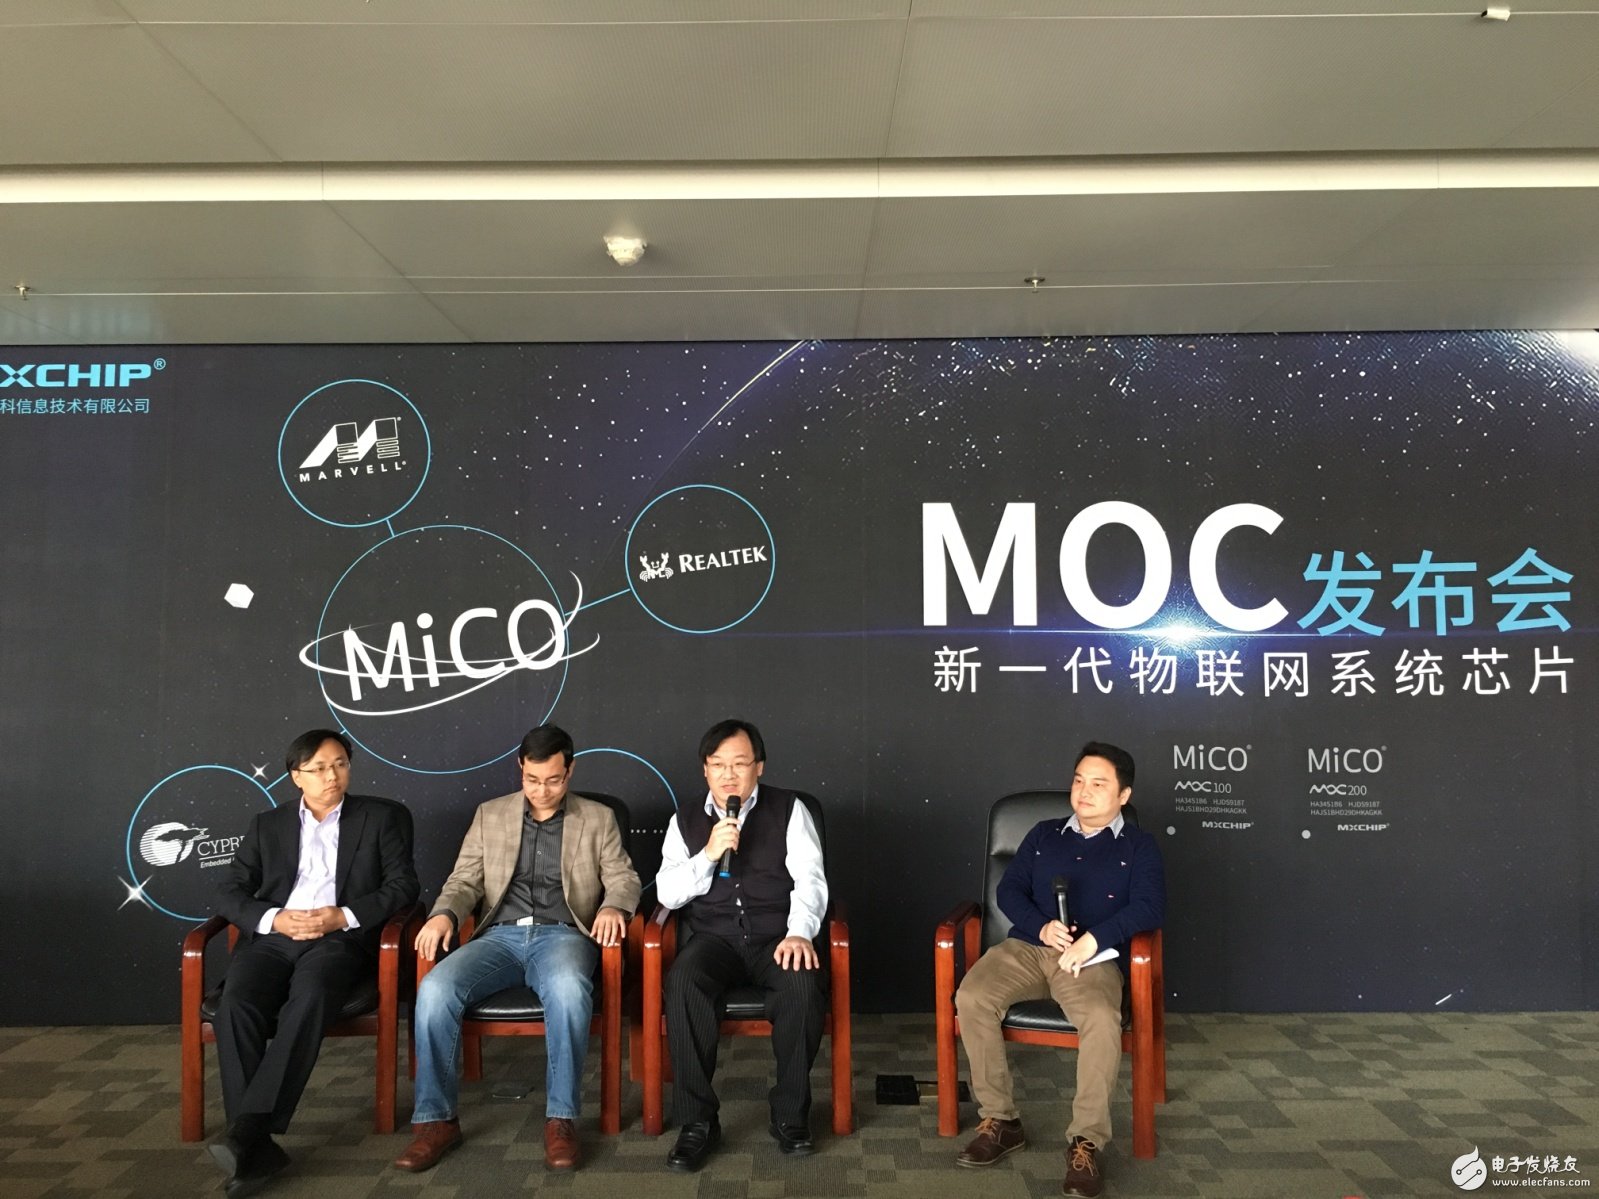 MARVELL Technical Director Meng Shu, CYPRESS Technical Director Simon Yang, REALTEK Product Director Jimmy Chin and Shanghai Qingke Hardware System Director Jiang Wei Tongtai discuss MOC